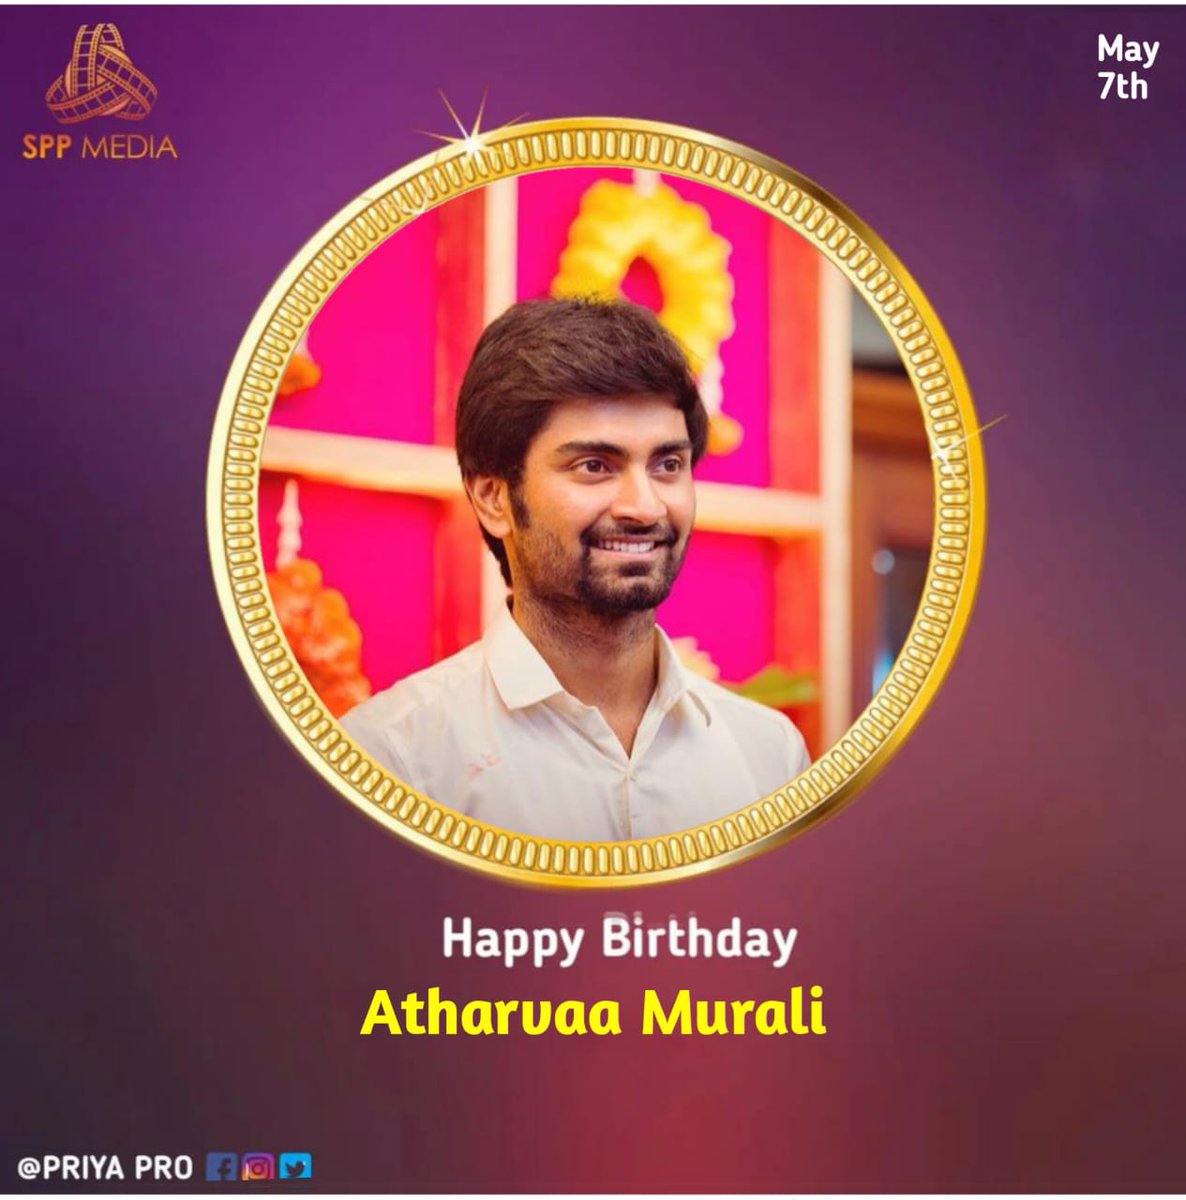 Happy Birthday💫 @Atharvaamurali Wishes From Team @spp_media @PRO_Priya #HappyBirthdayAtharvaaMurali #HBDAtharvaamurali